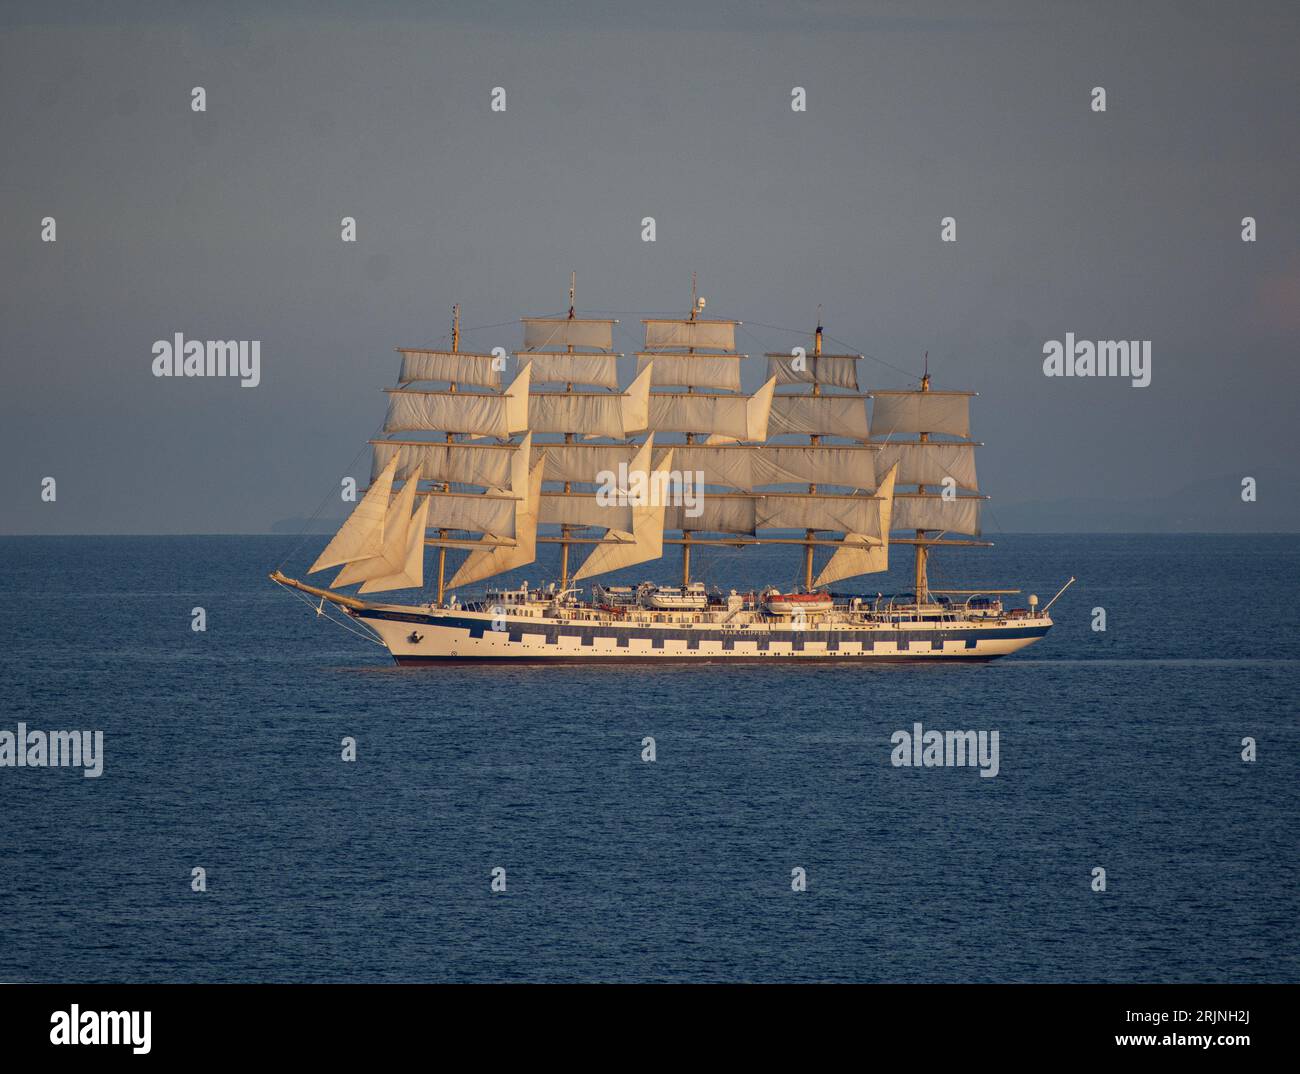 A large sailboat with white sails and blue trim floating in the middle of a vast blue water in Italy Stock Photo